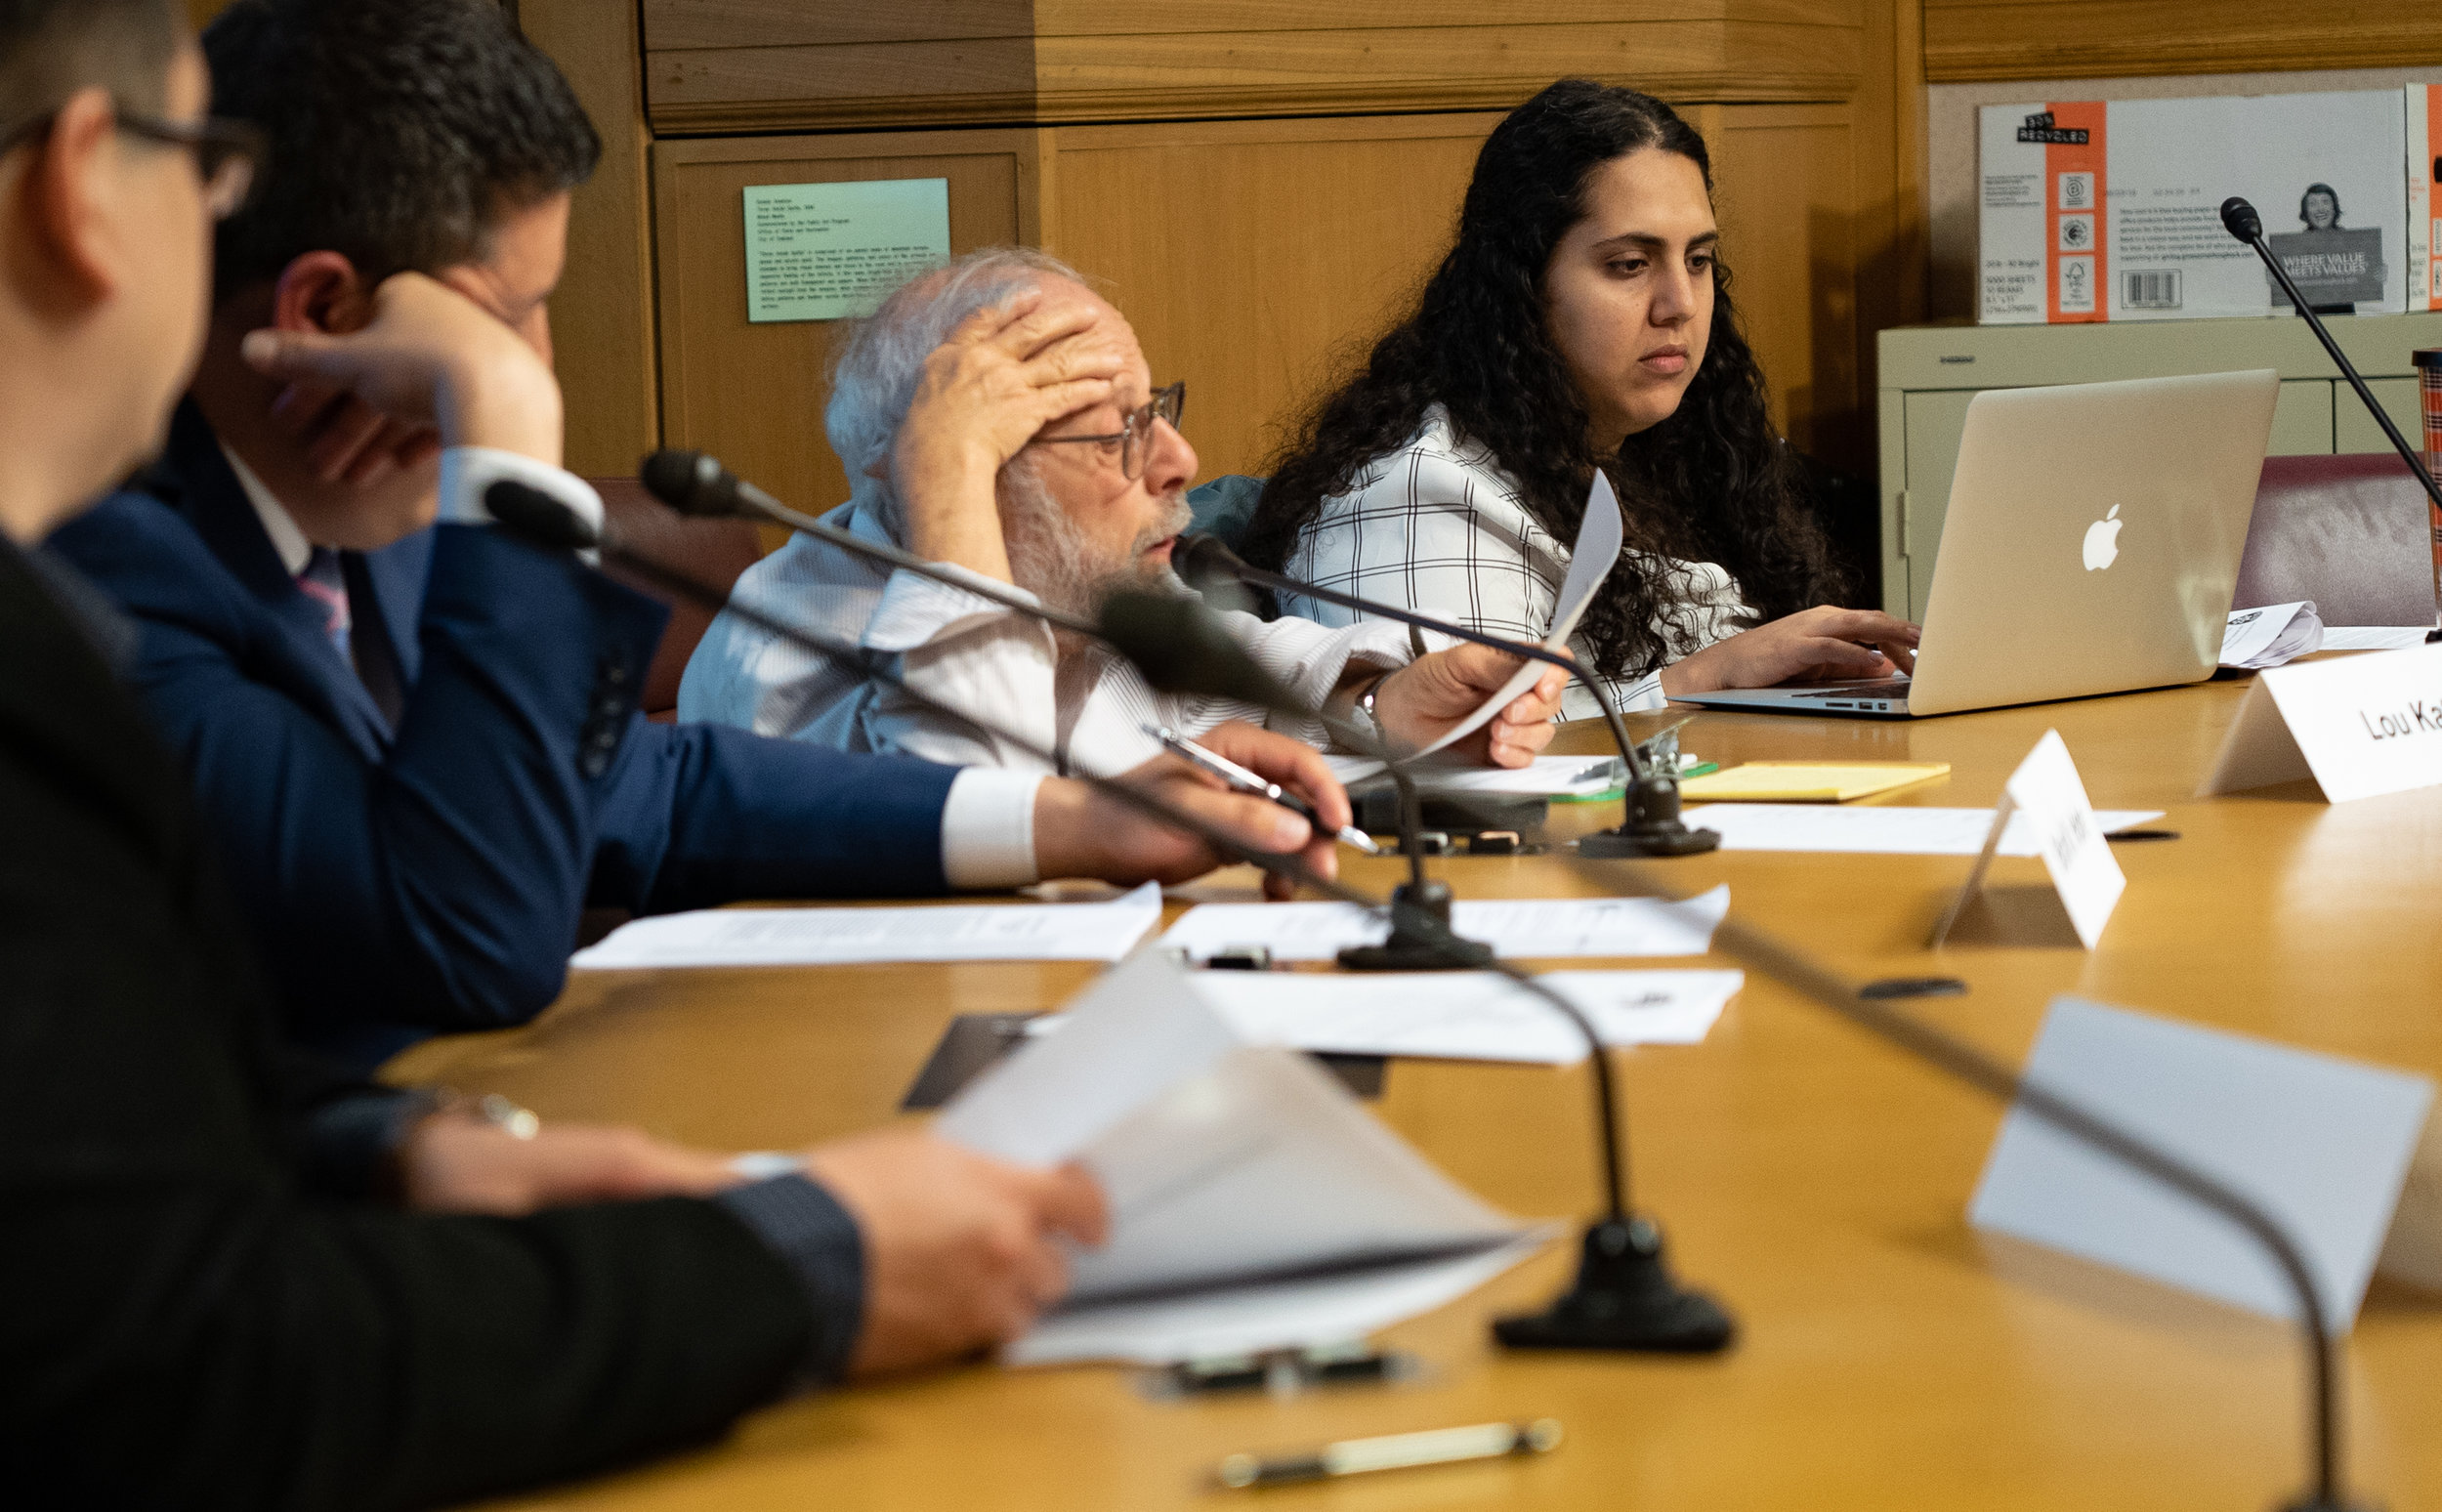  OPAC members Brian Hofer, Lou Katz, and Reem Suleiman review notes during the Commission's April 2019 meeting.  